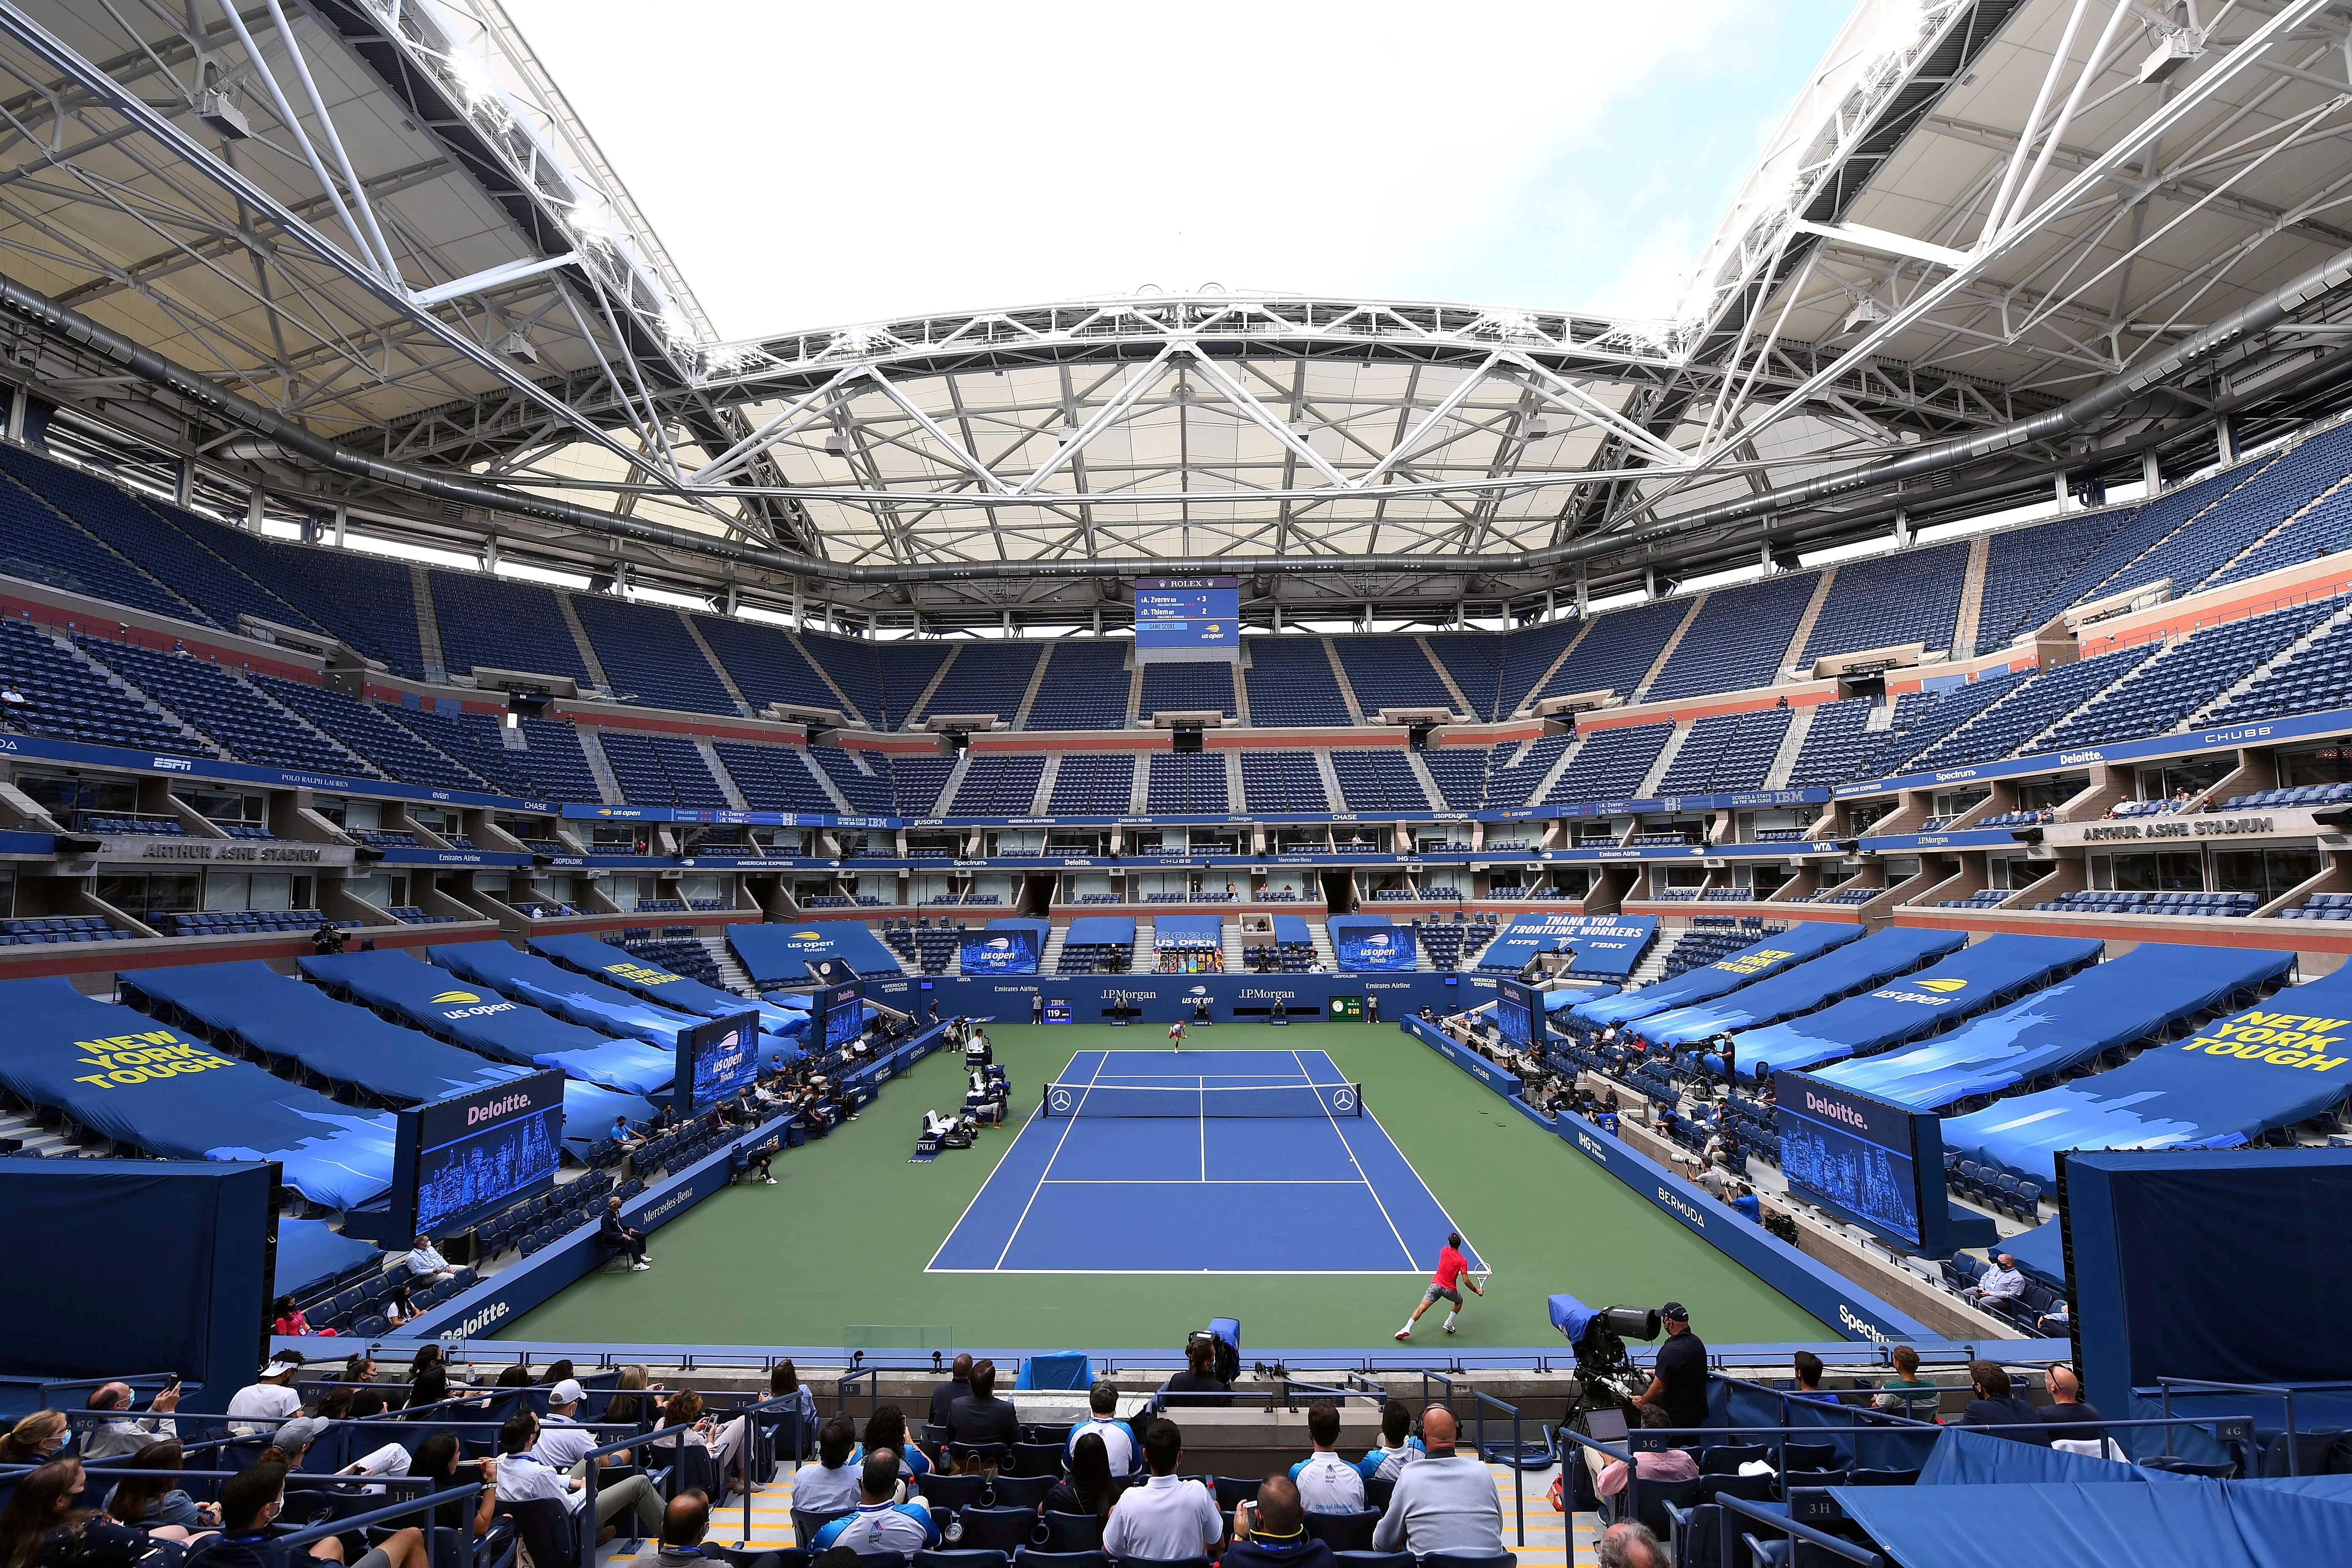 Fans return to Flushing Meadows as U.S. Open gets underway | Reuters